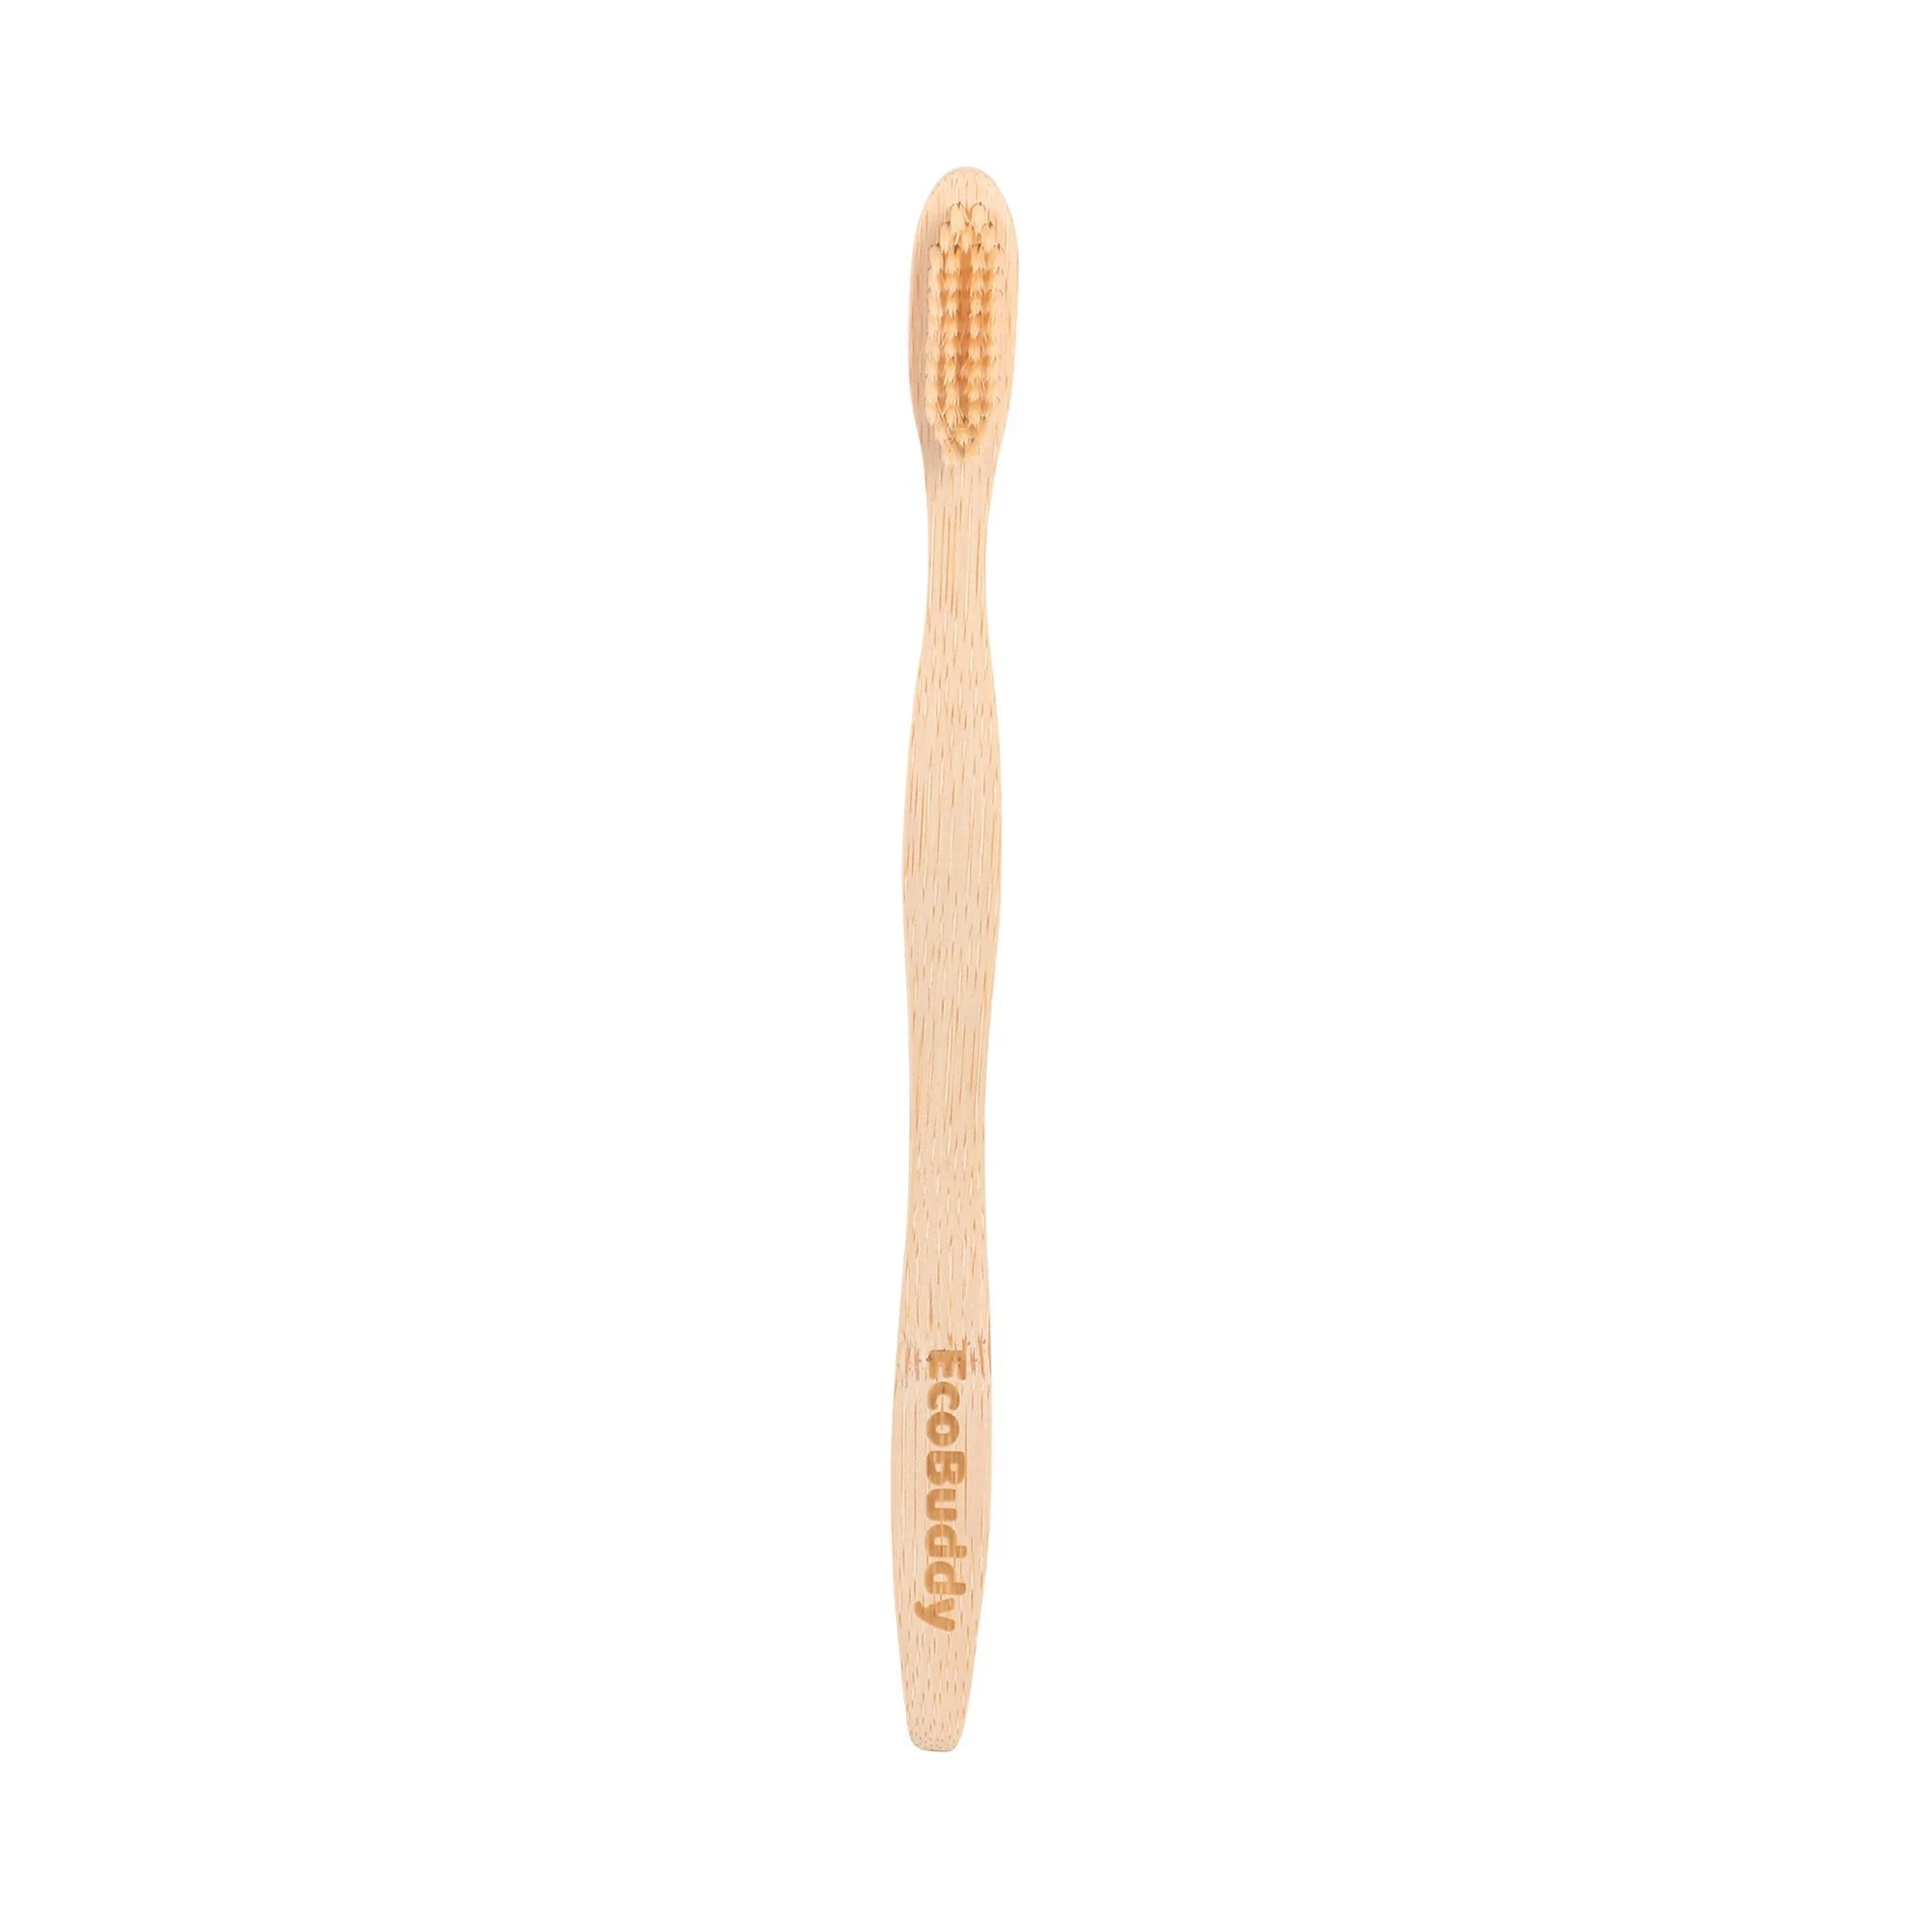 Eco Buddy 2 Bamboo Fibre, 2 Charcoal Infused Bristles Bamboo Toothbrushes